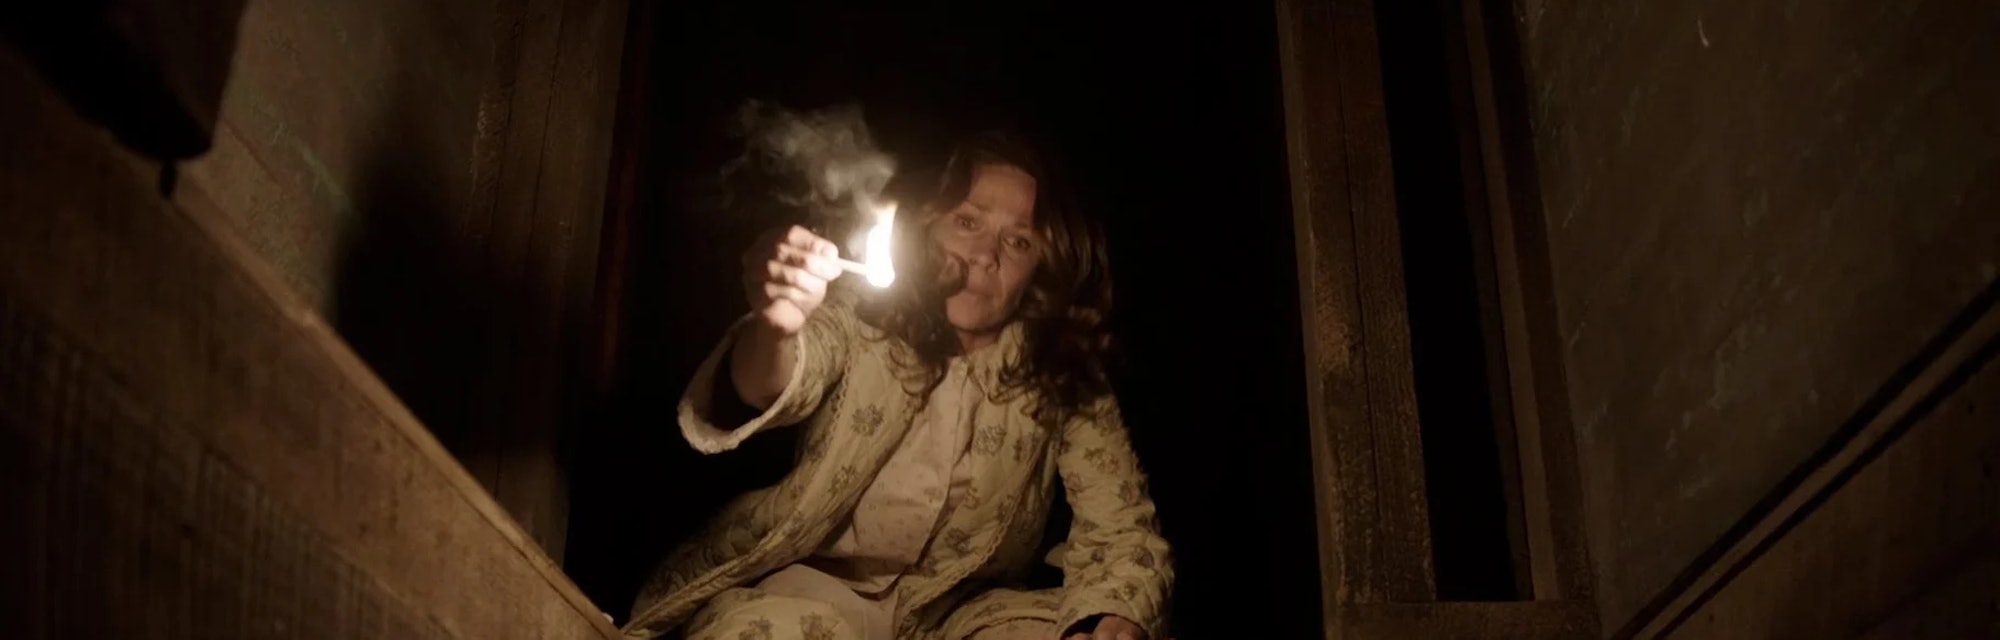 Lili Taylor holds a lit match as Carolyn Perron in 2013's The Conjuring